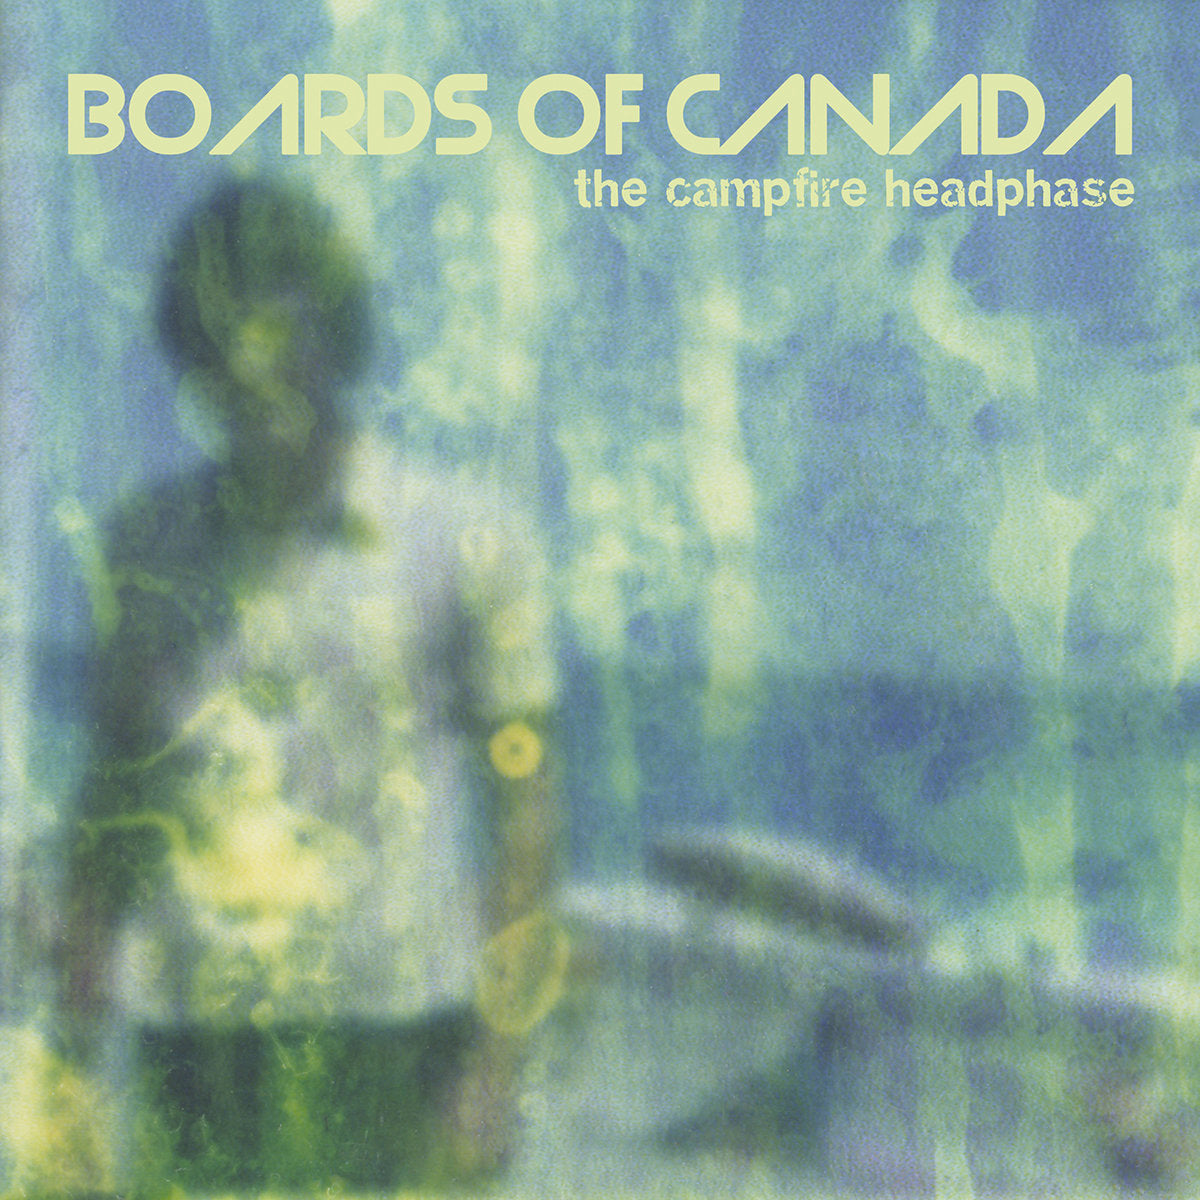 Boards Of Canada - The Campire Headphase